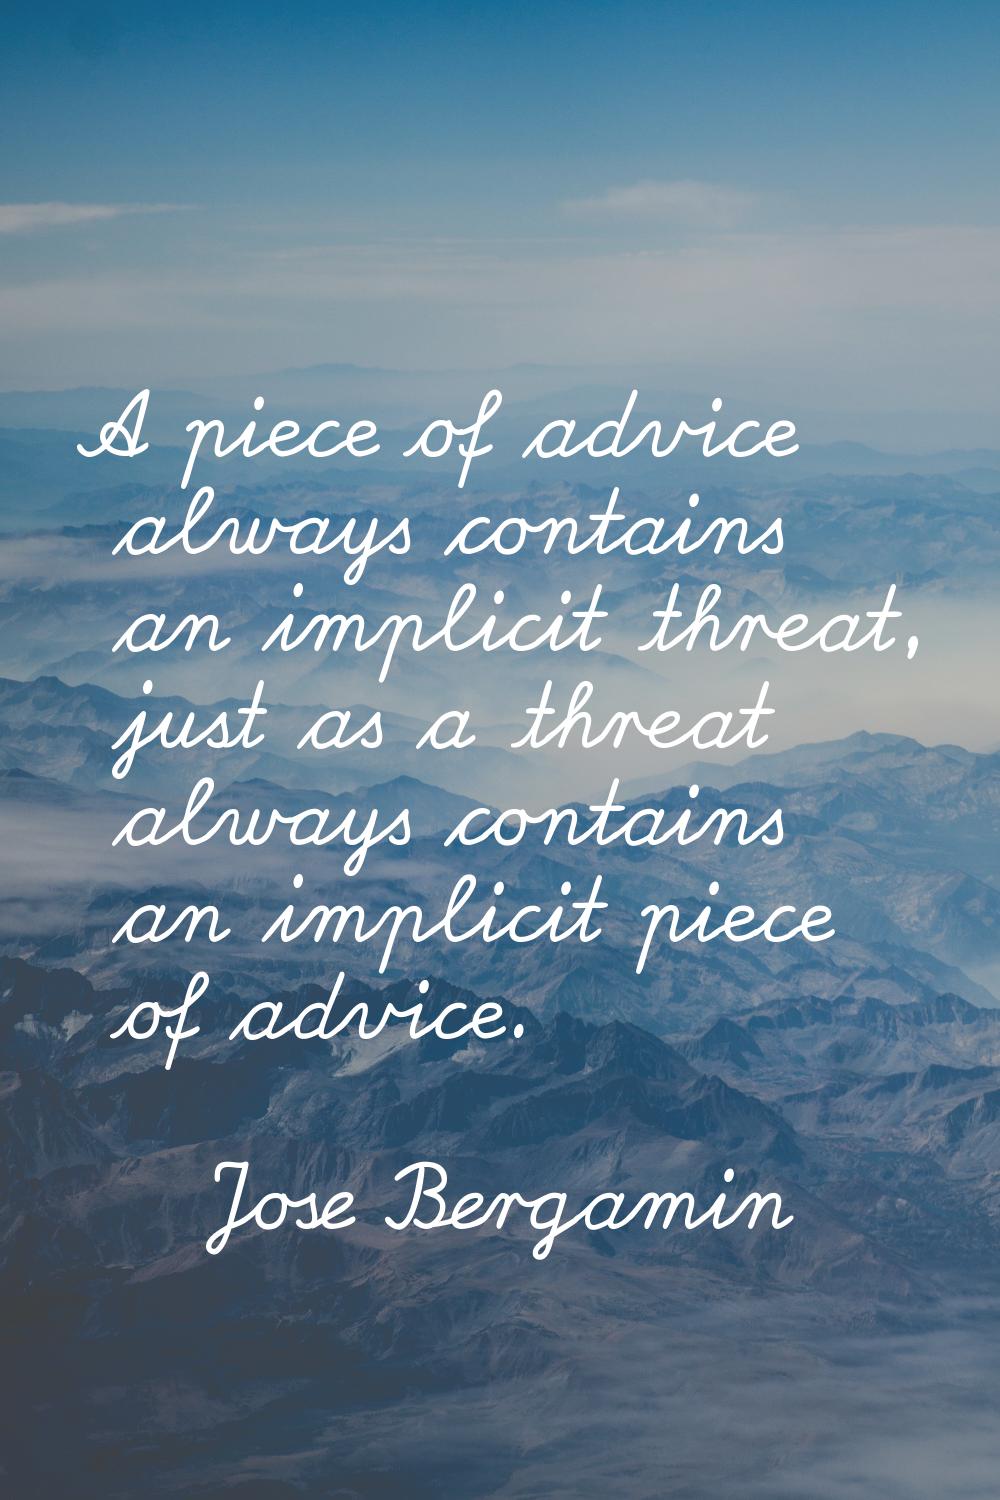 A piece of advice always contains an implicit threat, just as a threat always contains an implicit 